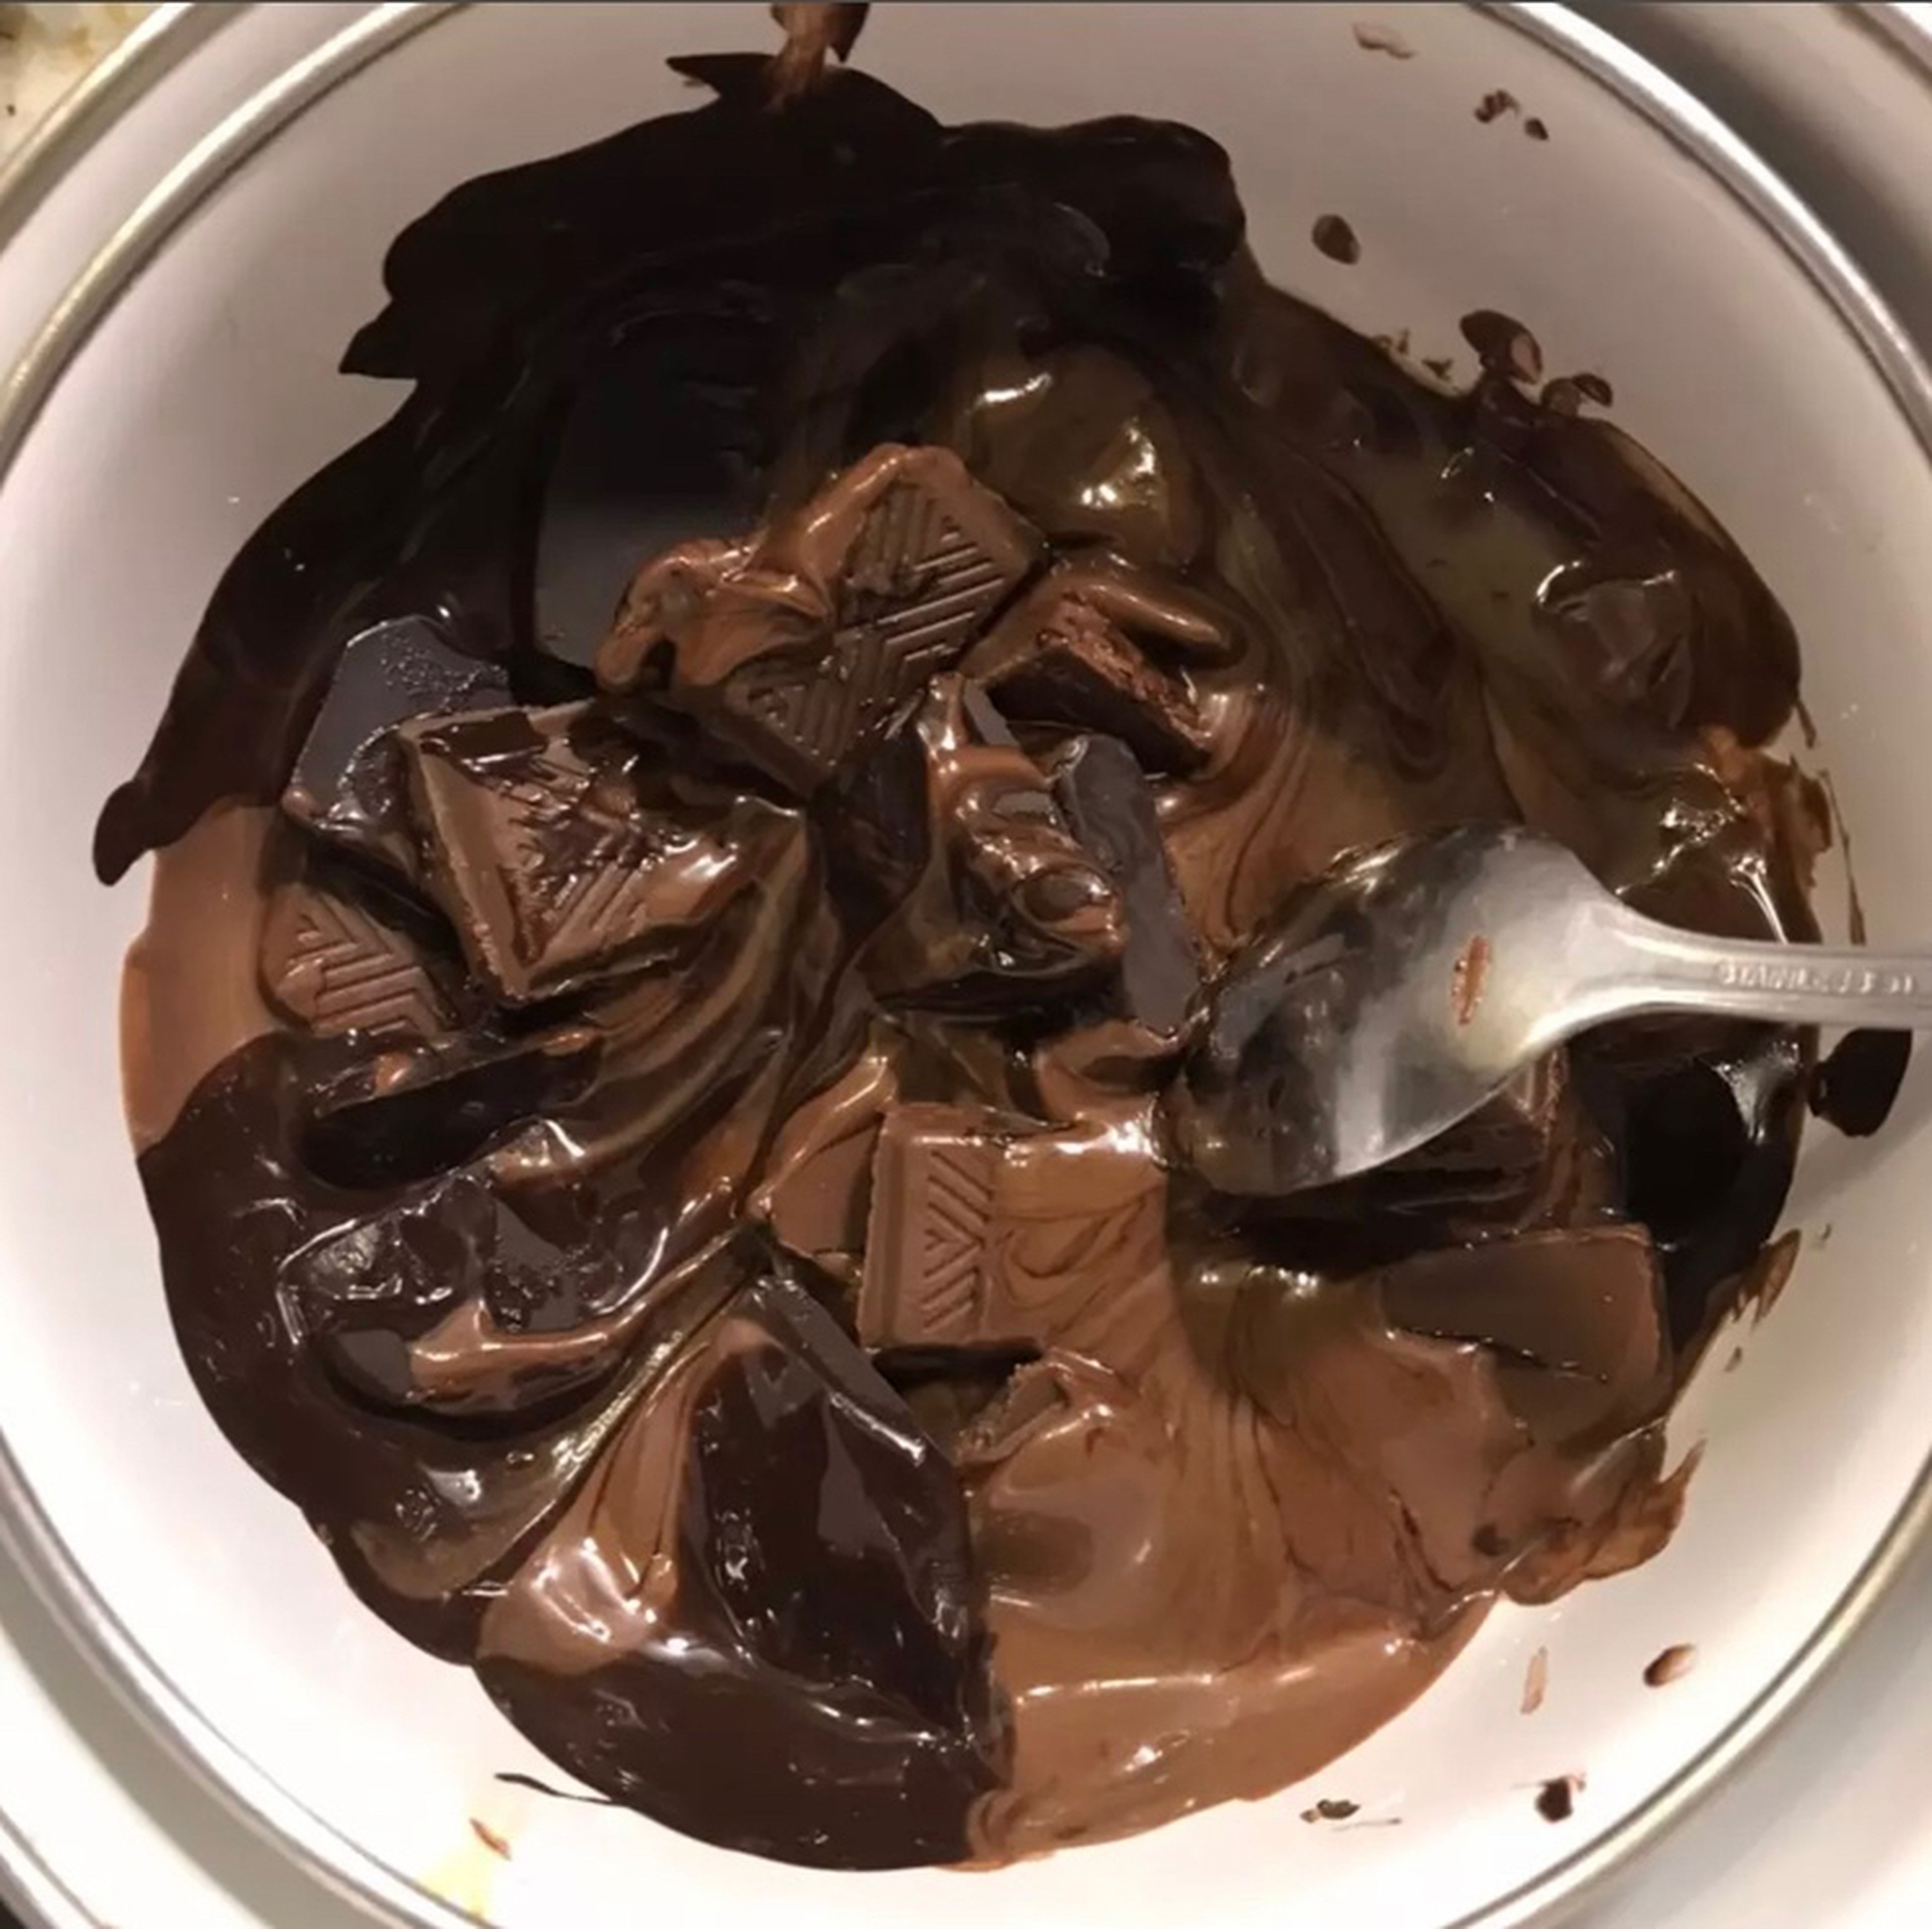 Pour a little water in a metal container and put it on a low flame to heat. Then we take a smaller metal container and pour the sliced chocolate on it. Put it in a bowl of hot water and melt it using the Ben Marie method. Stir until smooth.